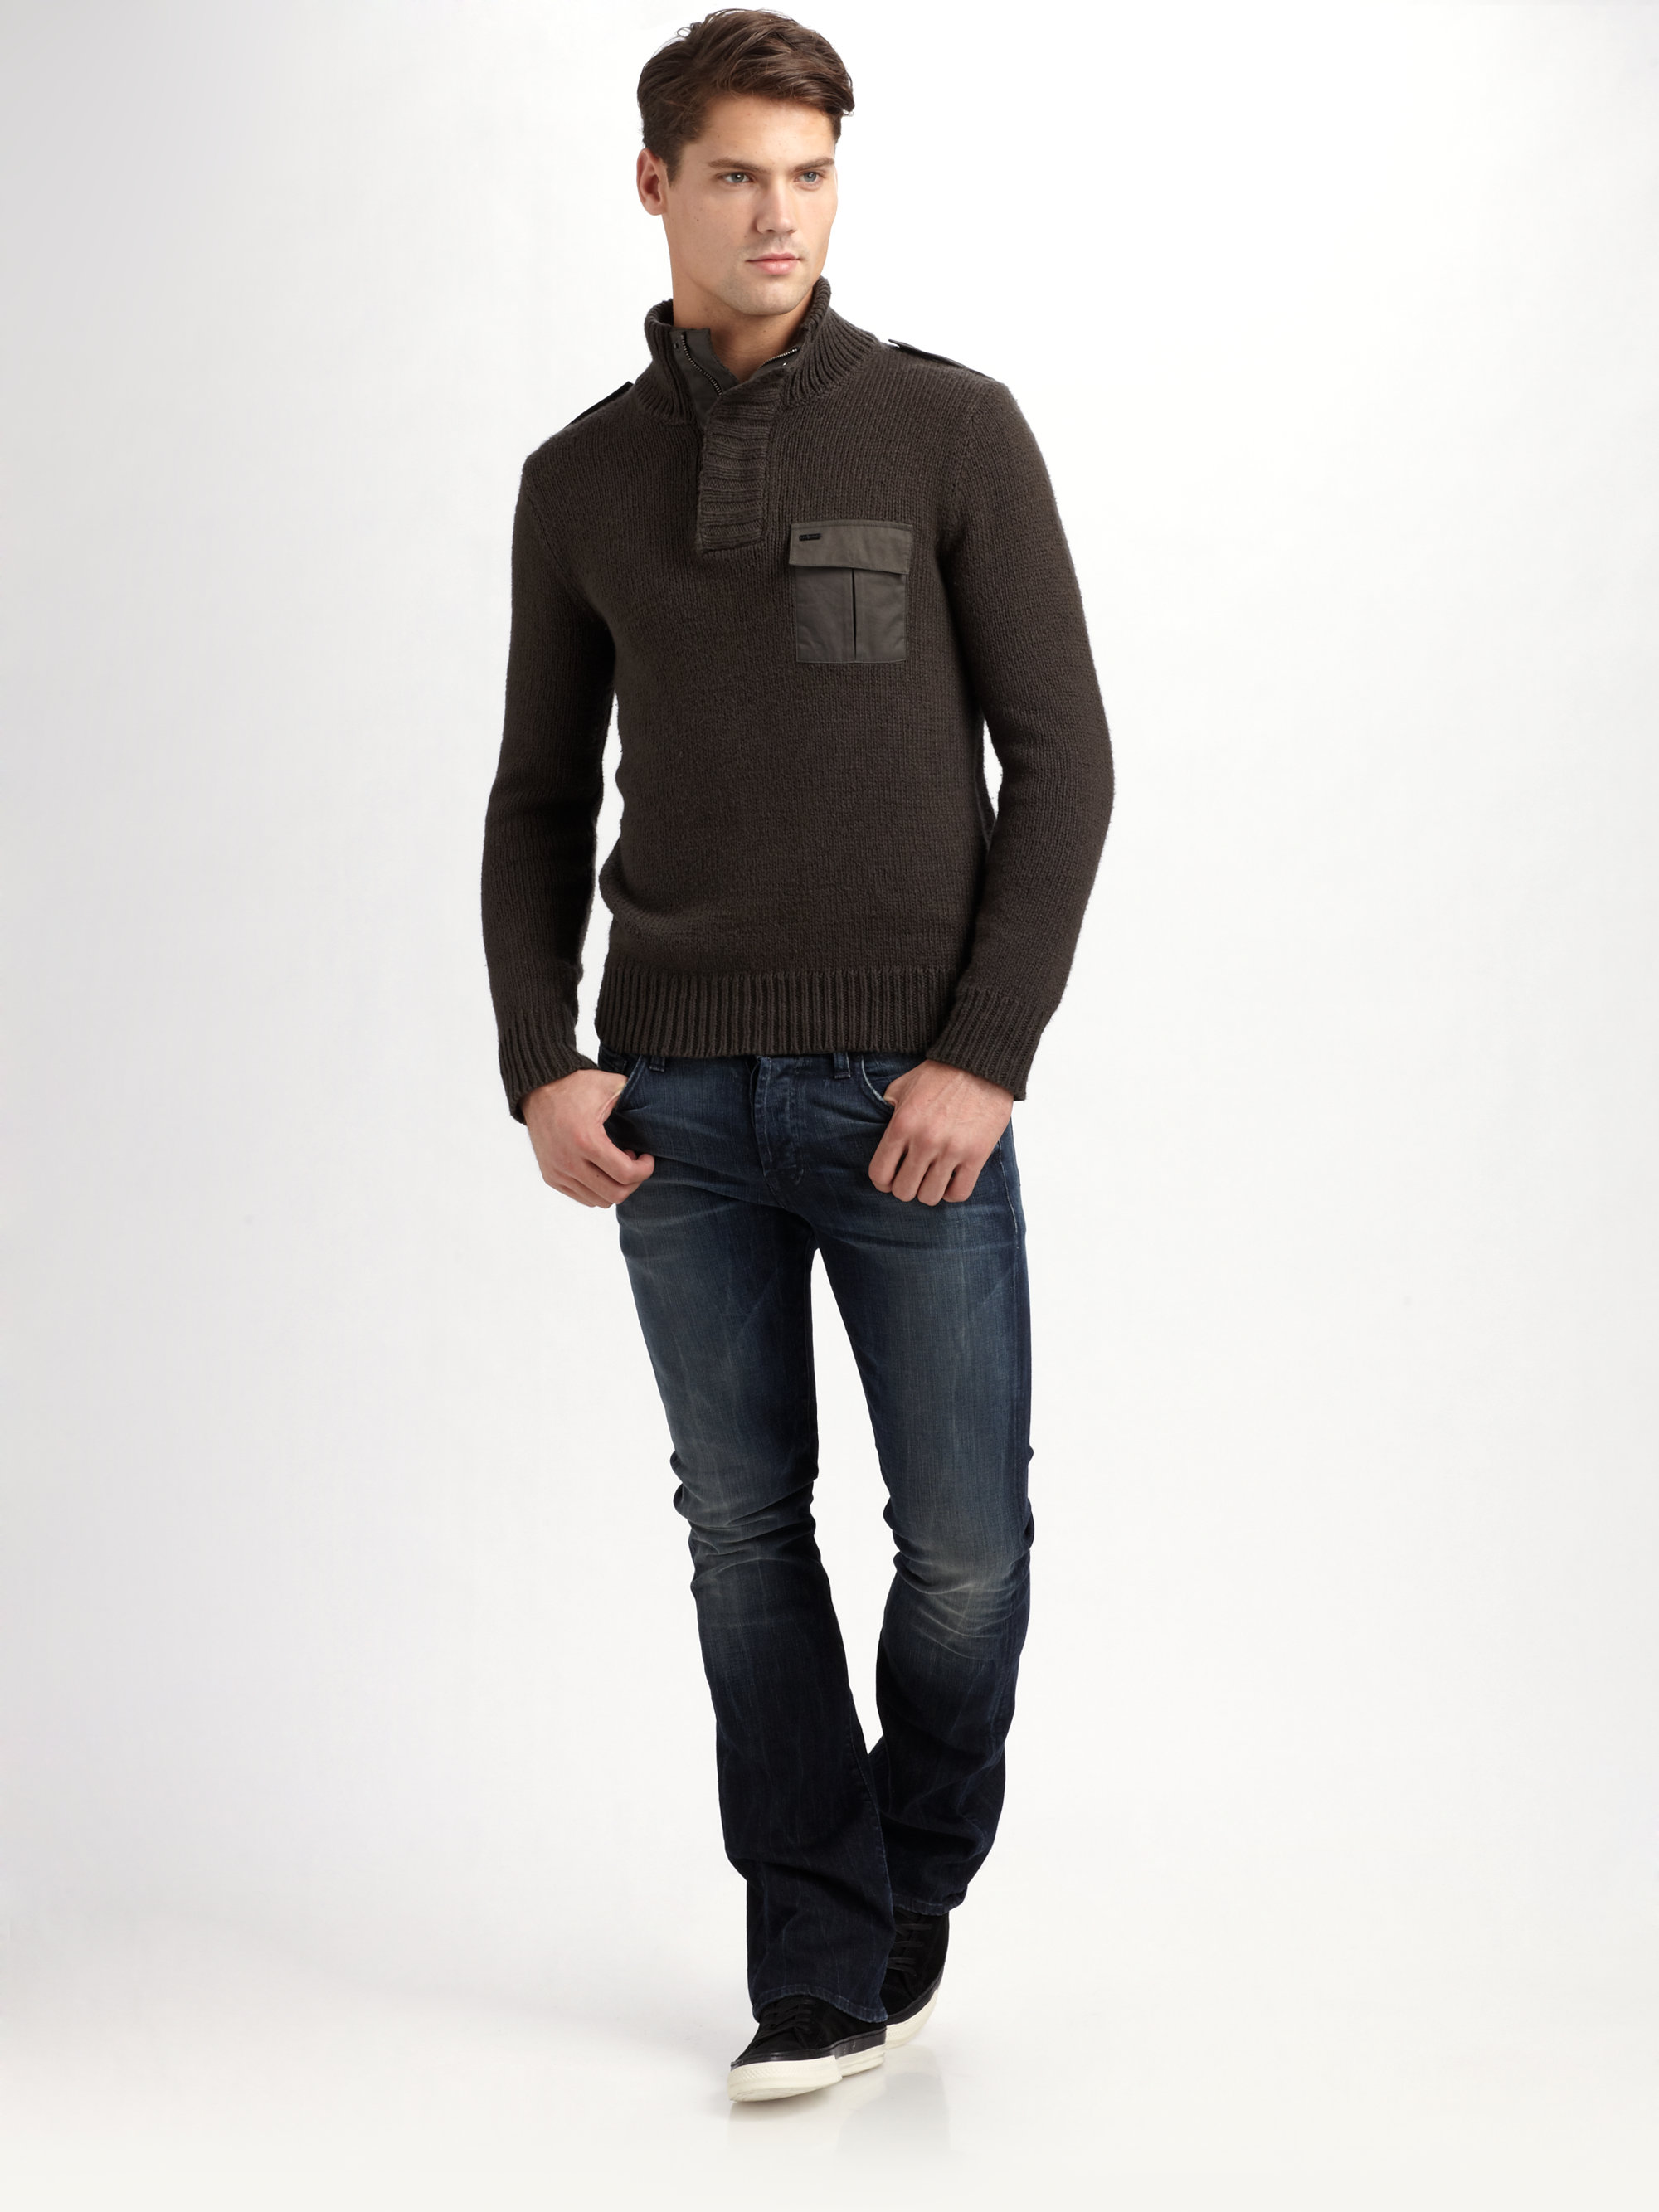 Lyst - 7 for all mankind Halfzip Military Sweater in Green for Men